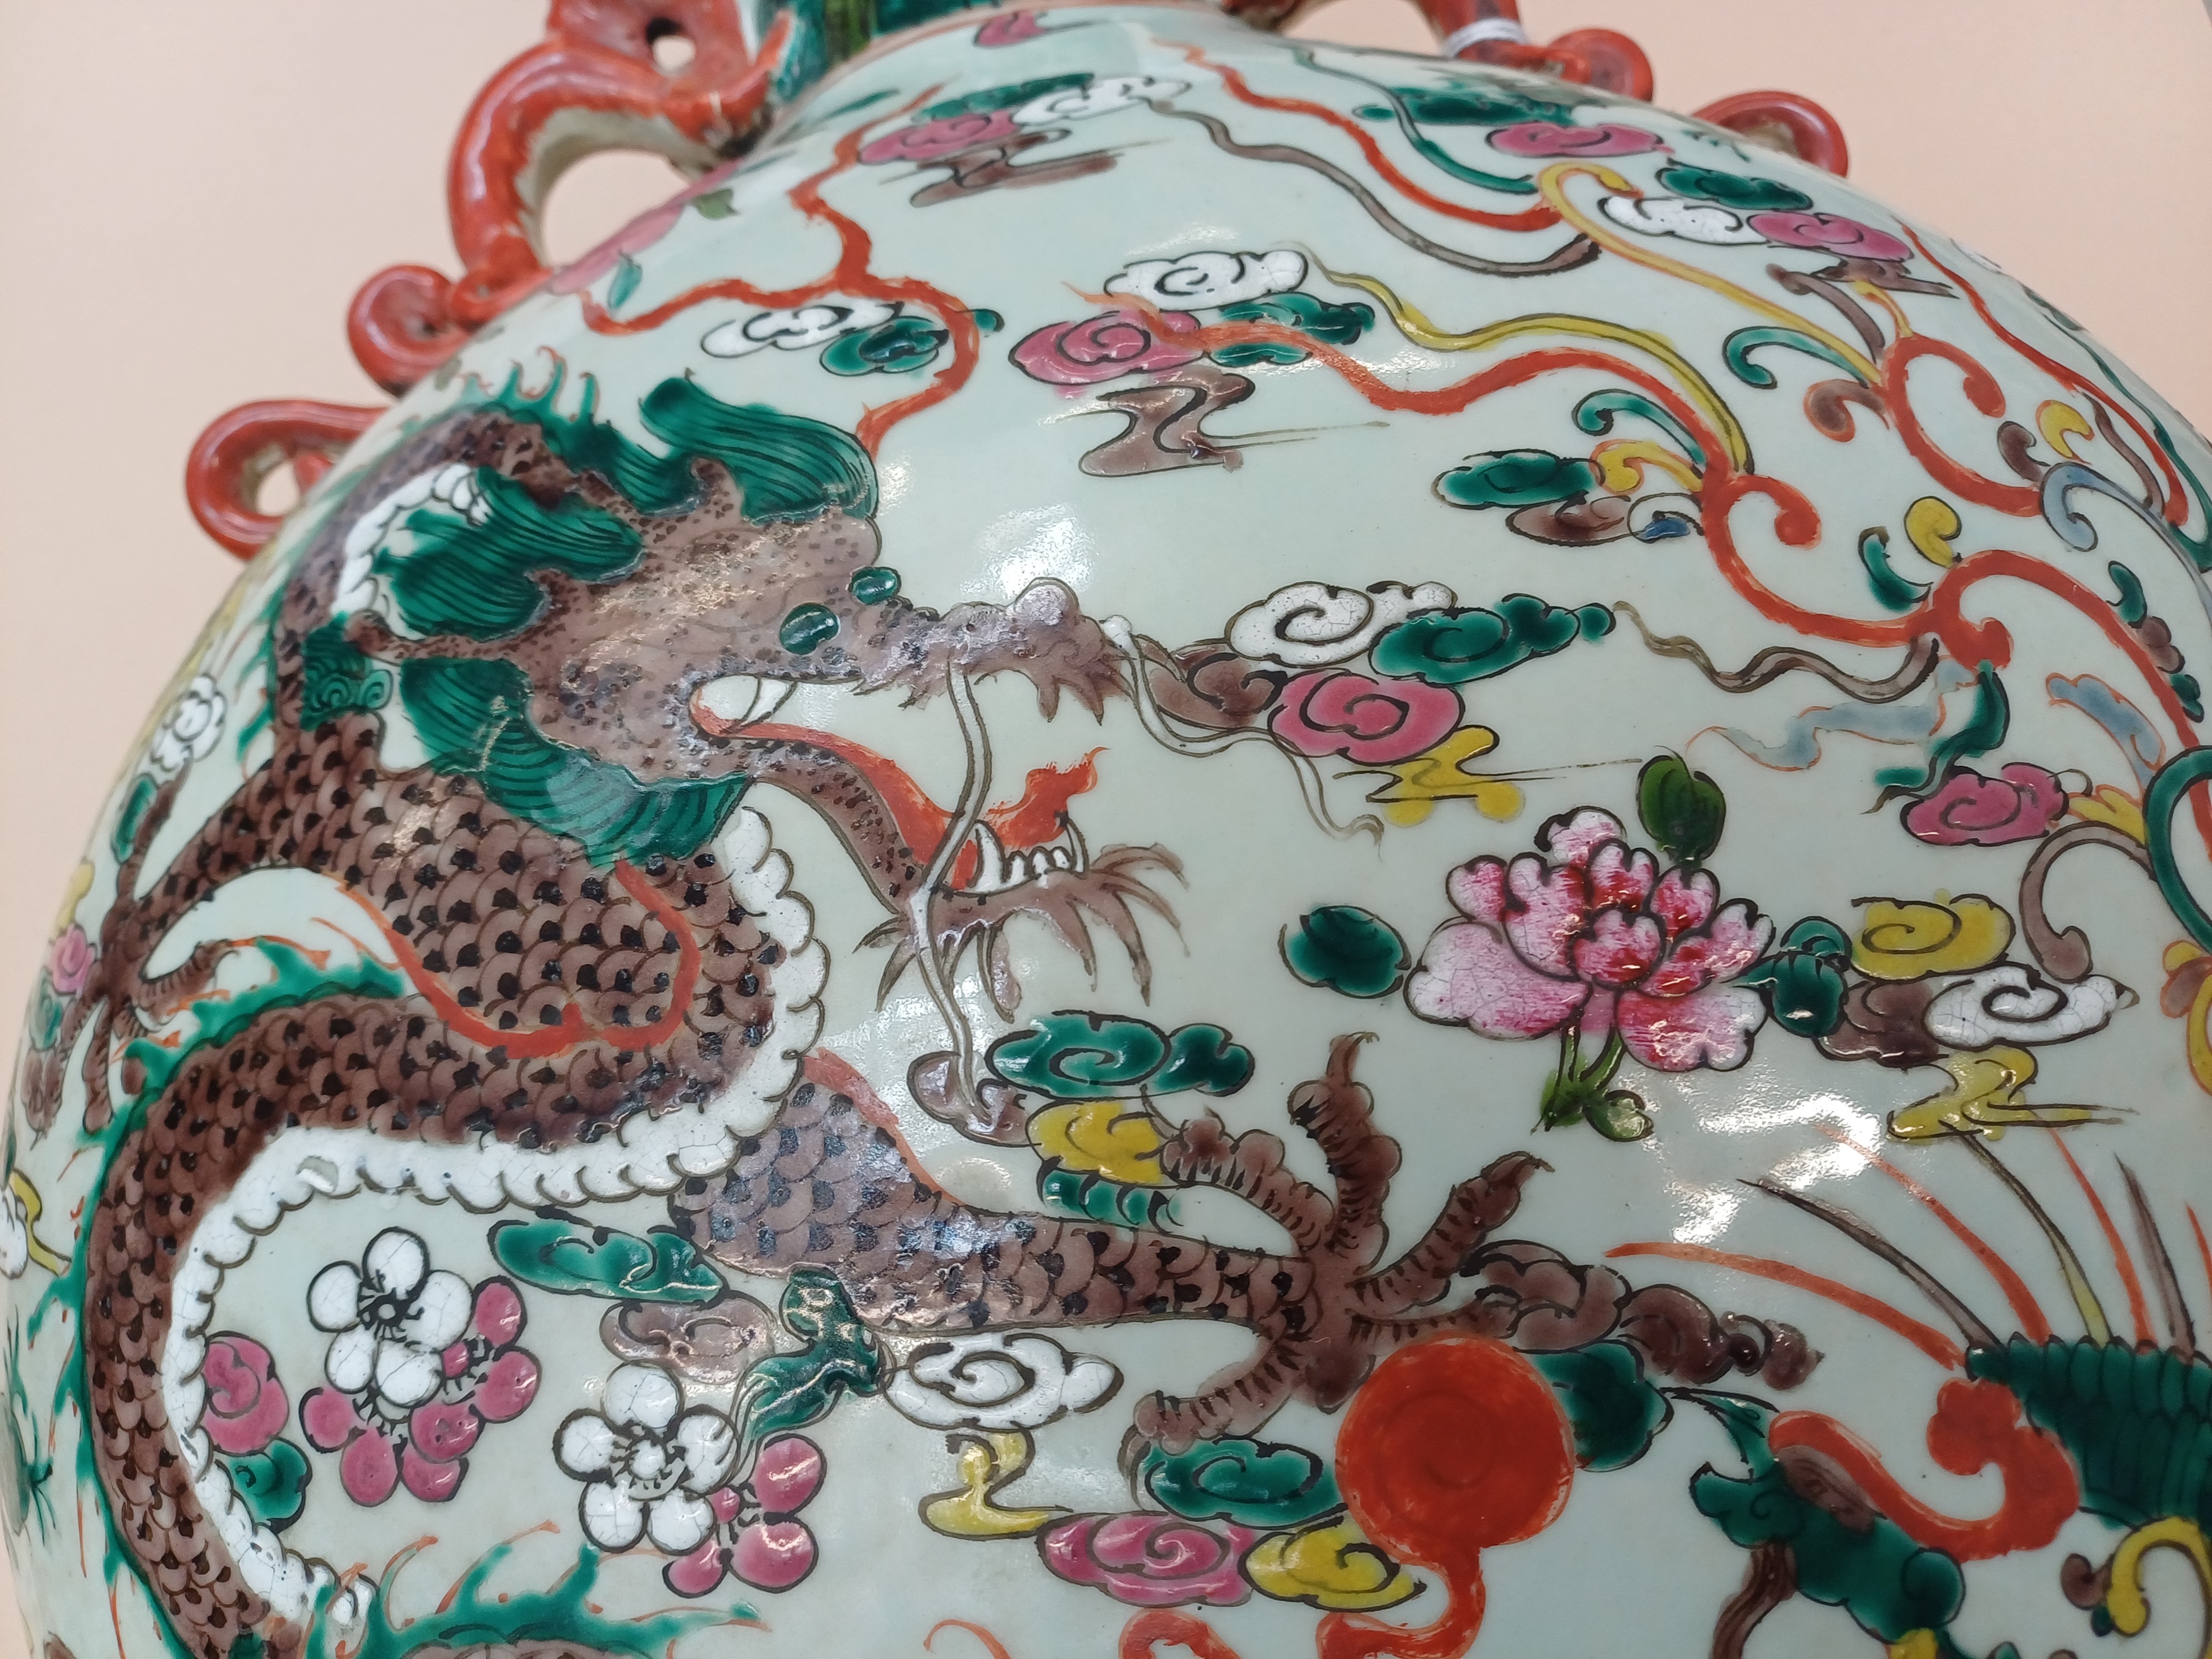 A CHINESE FAMILLE-ROSE 'DRAGON AND PHOENIX' MOONFLASK VASE 二十世紀 粉彩龍鳳呈祥紋抱月瓶 - Image 8 of 9